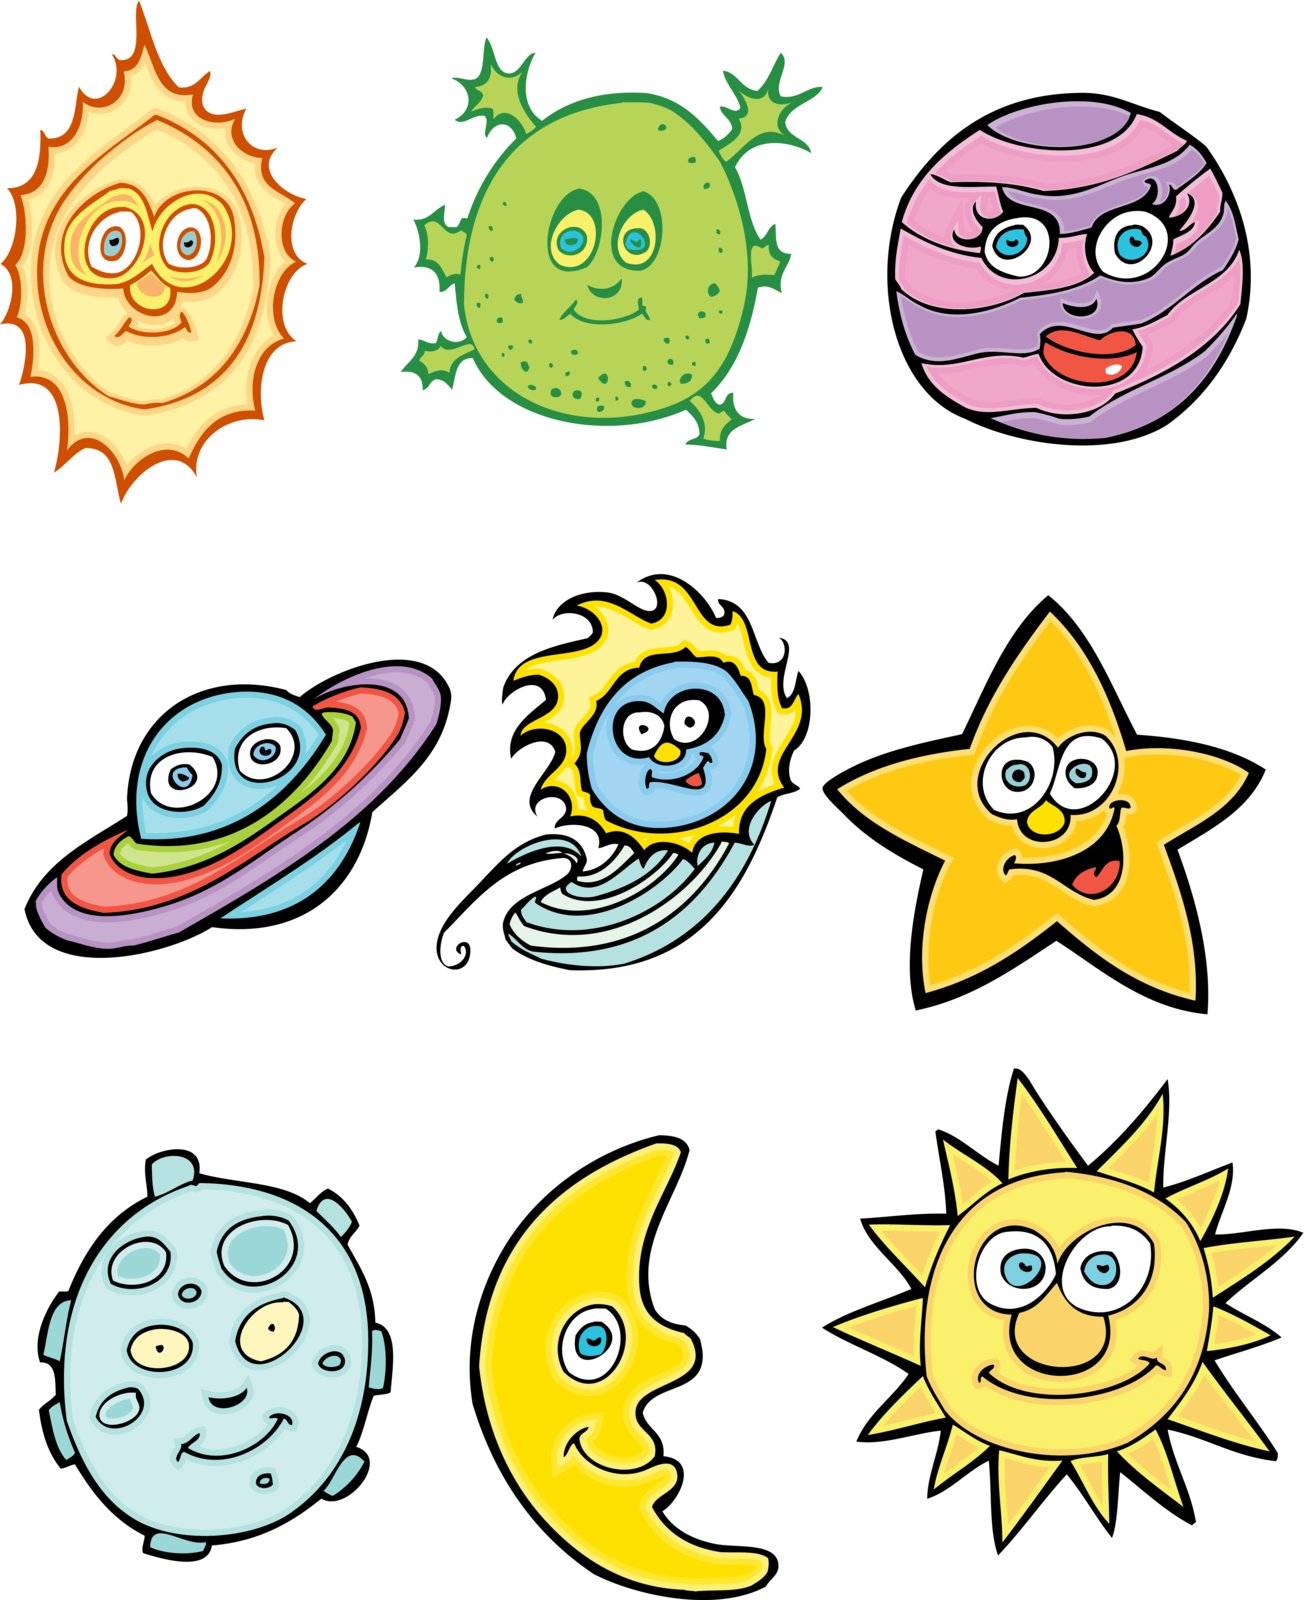 Astronomy Icons by cteconsulting